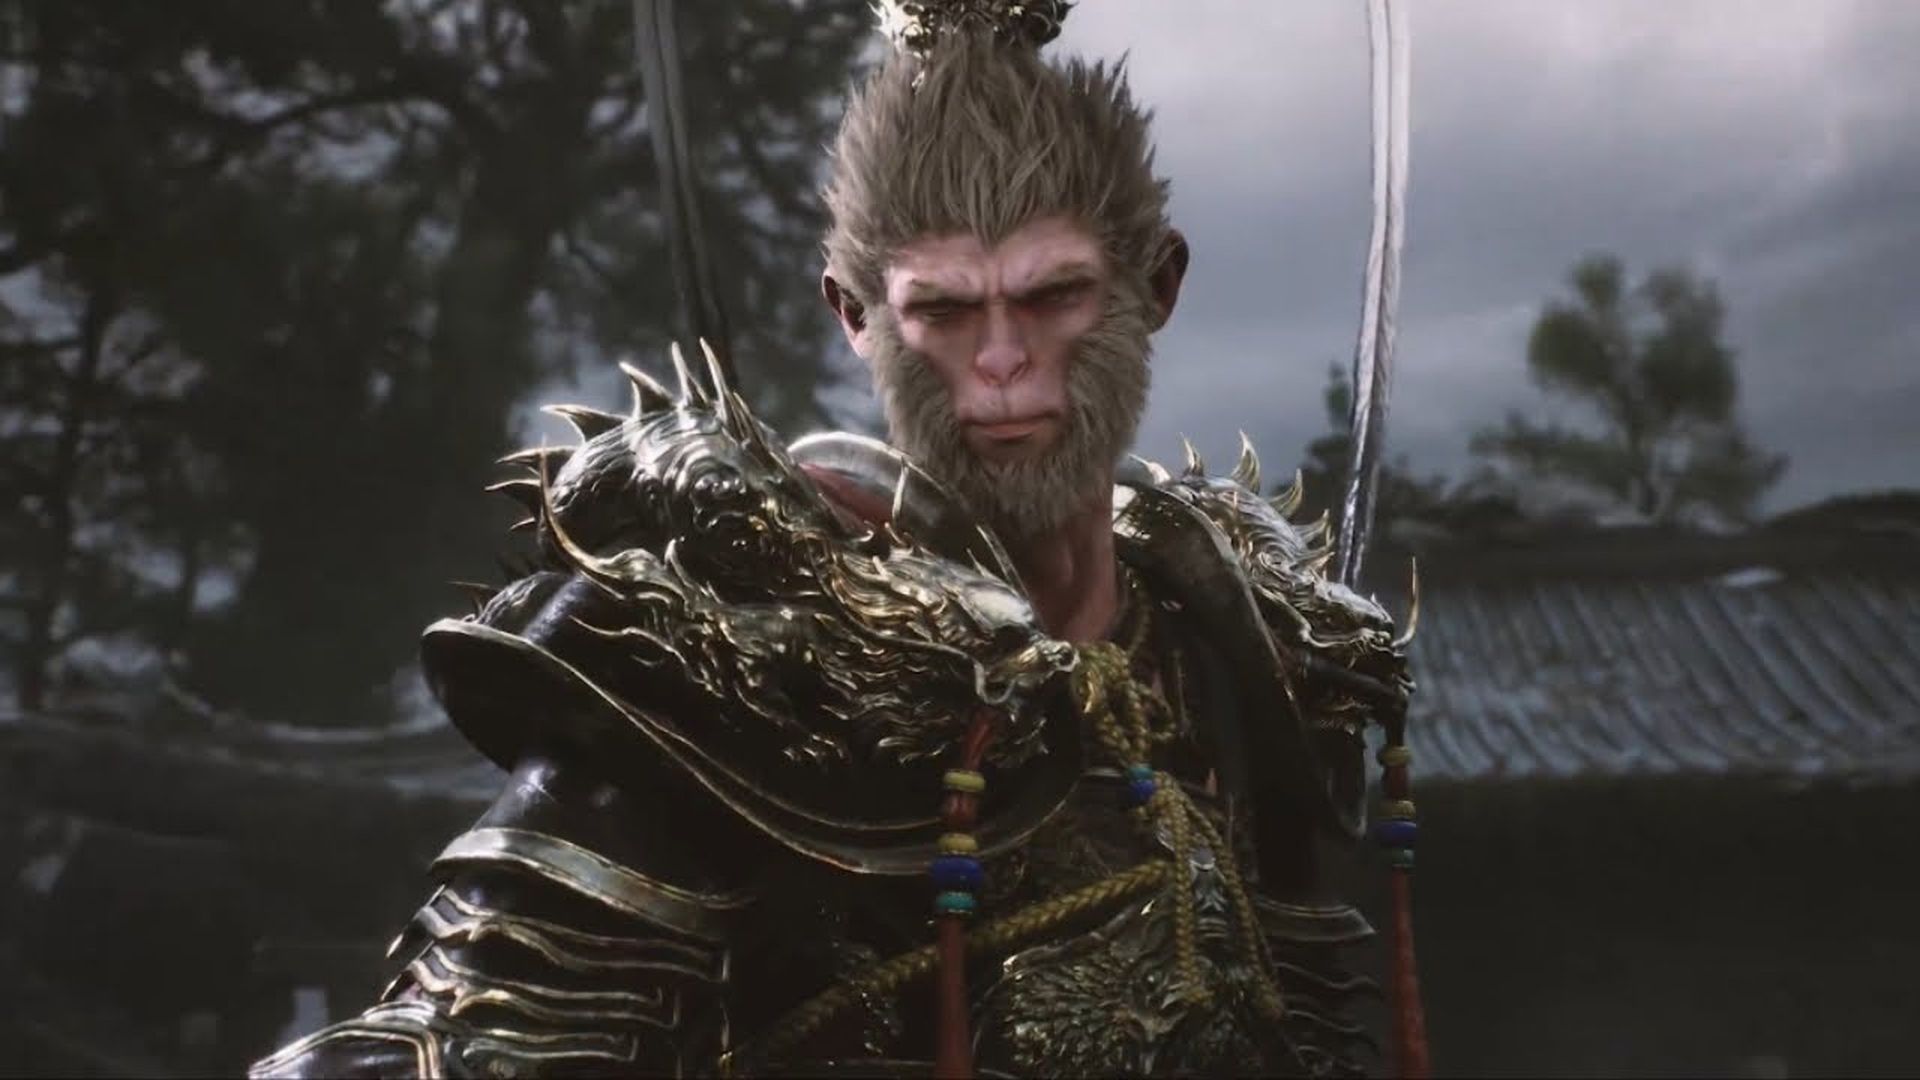 Black Myth, Black Myth Wukong, China, Chinese, Chinese Games, Game Science, Games, Journey to the West, Monkey, monkey king, PC, PC Games, The Monkey King, Wu Kong, Wukong